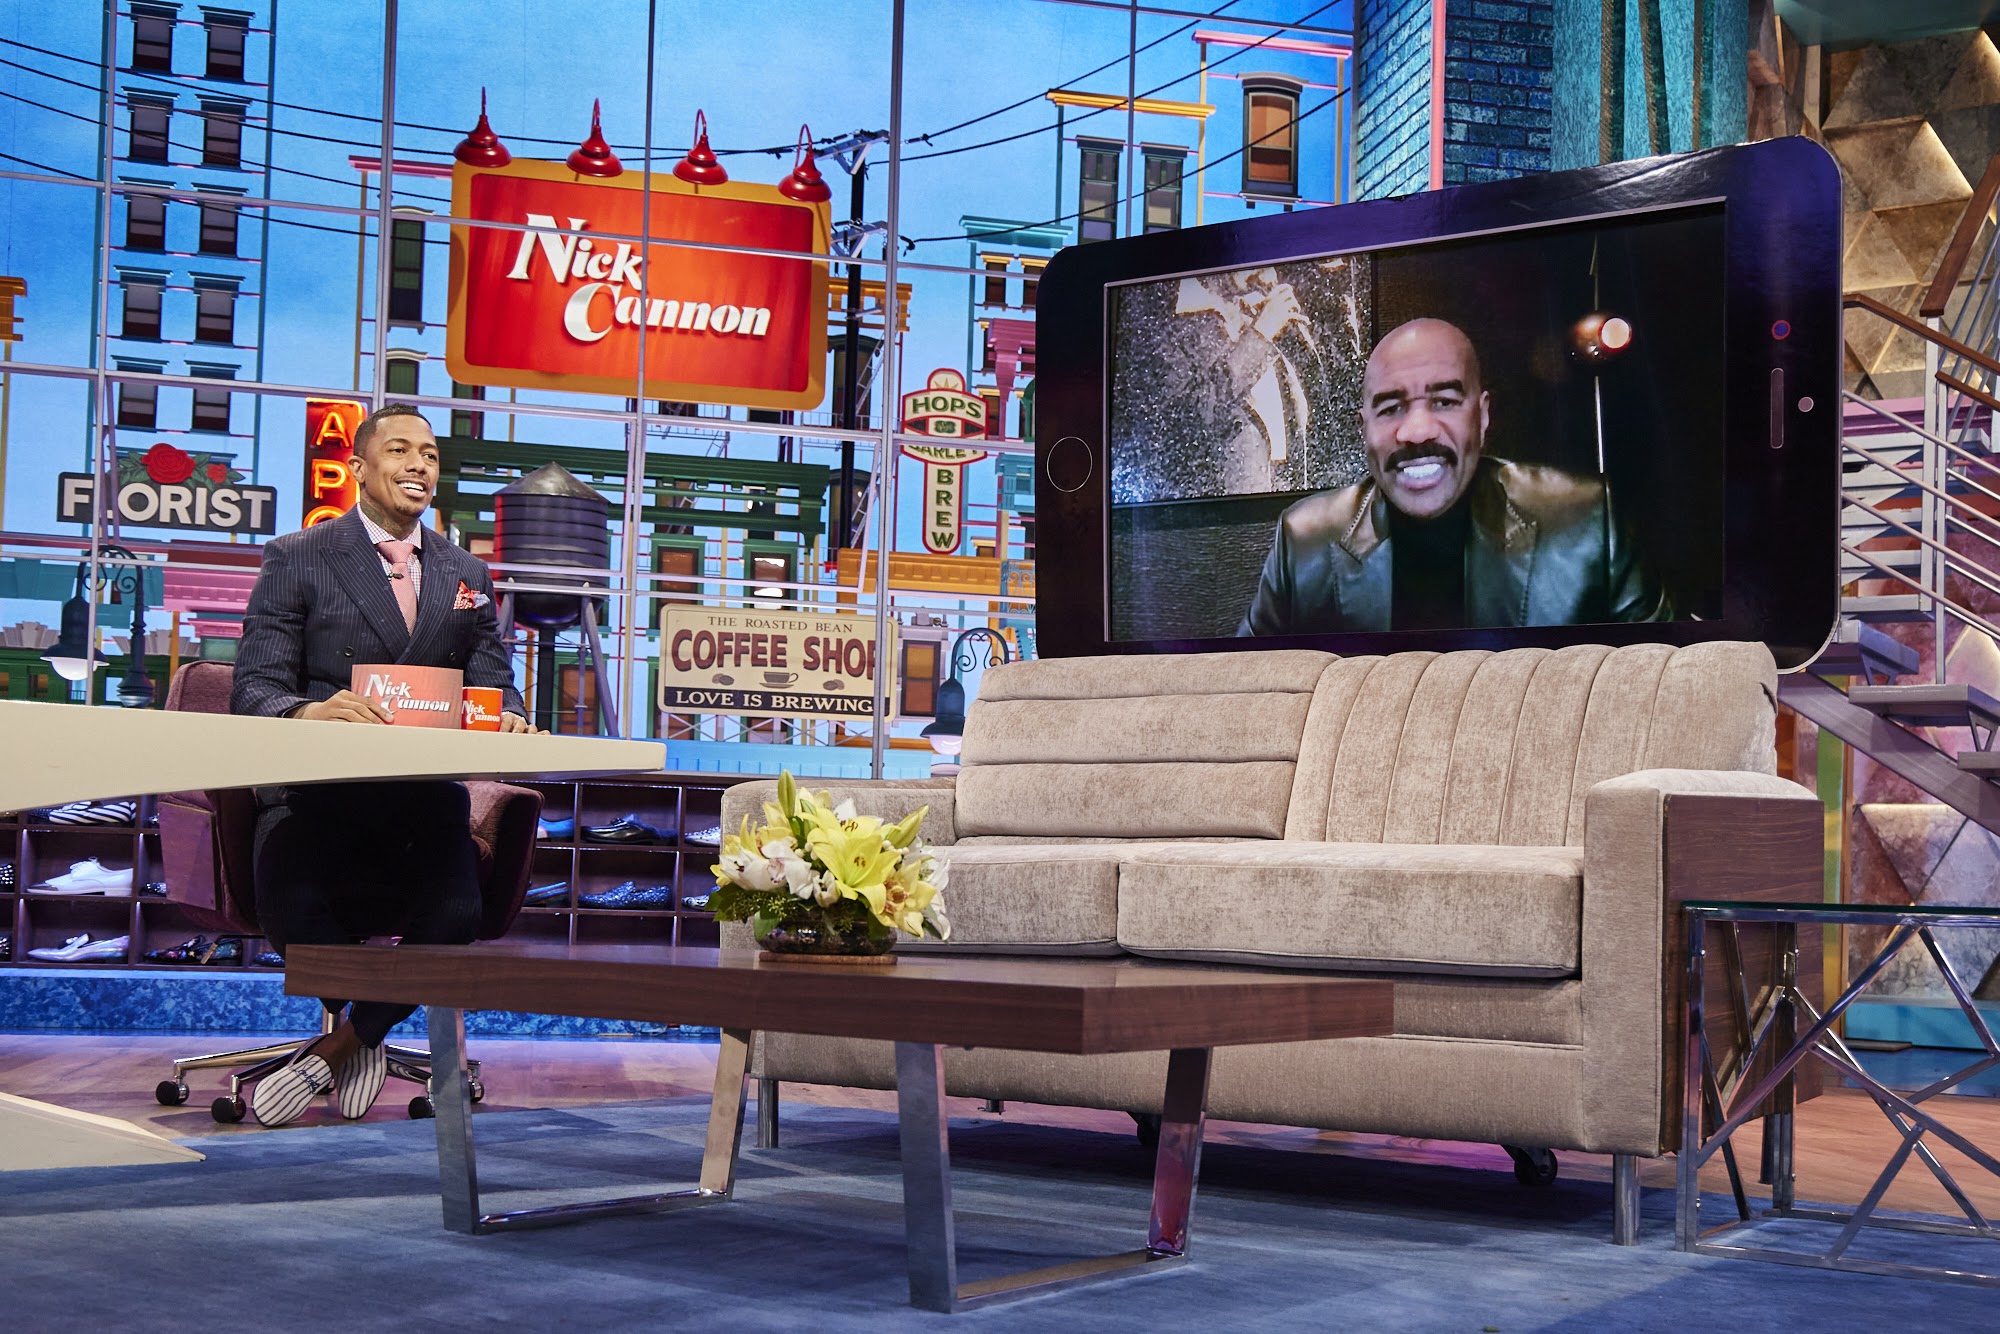 Steve Harvey Gives His Two Cents On Nick Cannon’s Halloween Impersonation